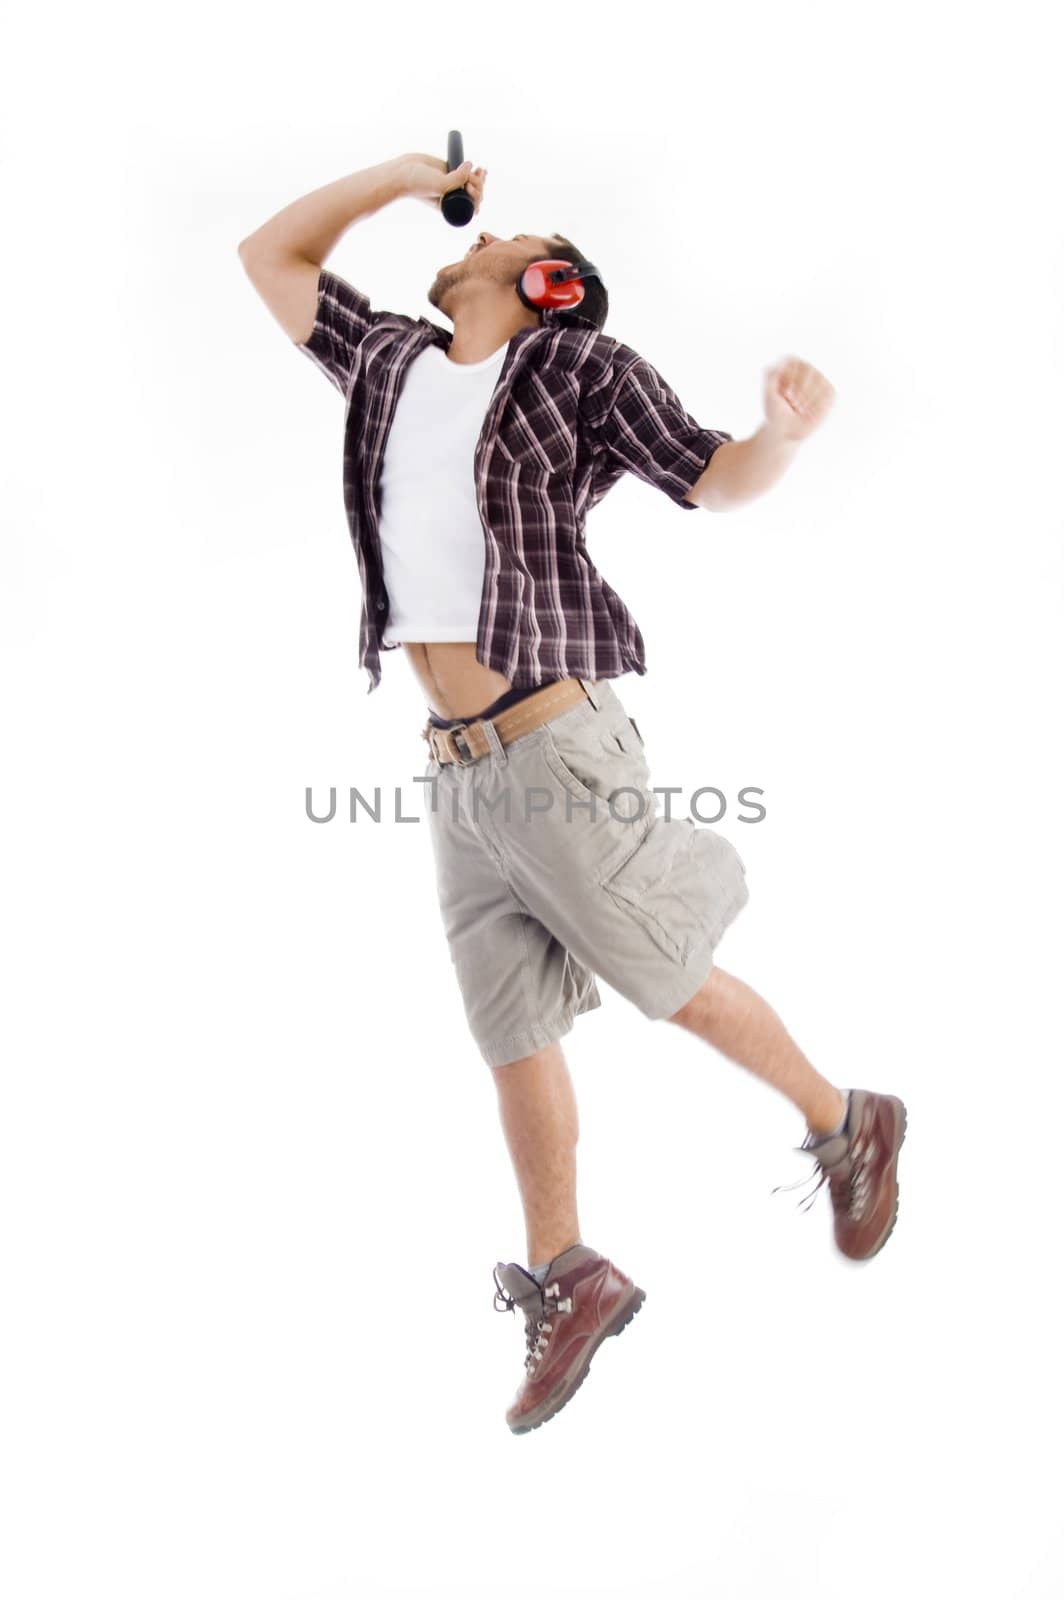 male model  jumping high in air on an isolated white background